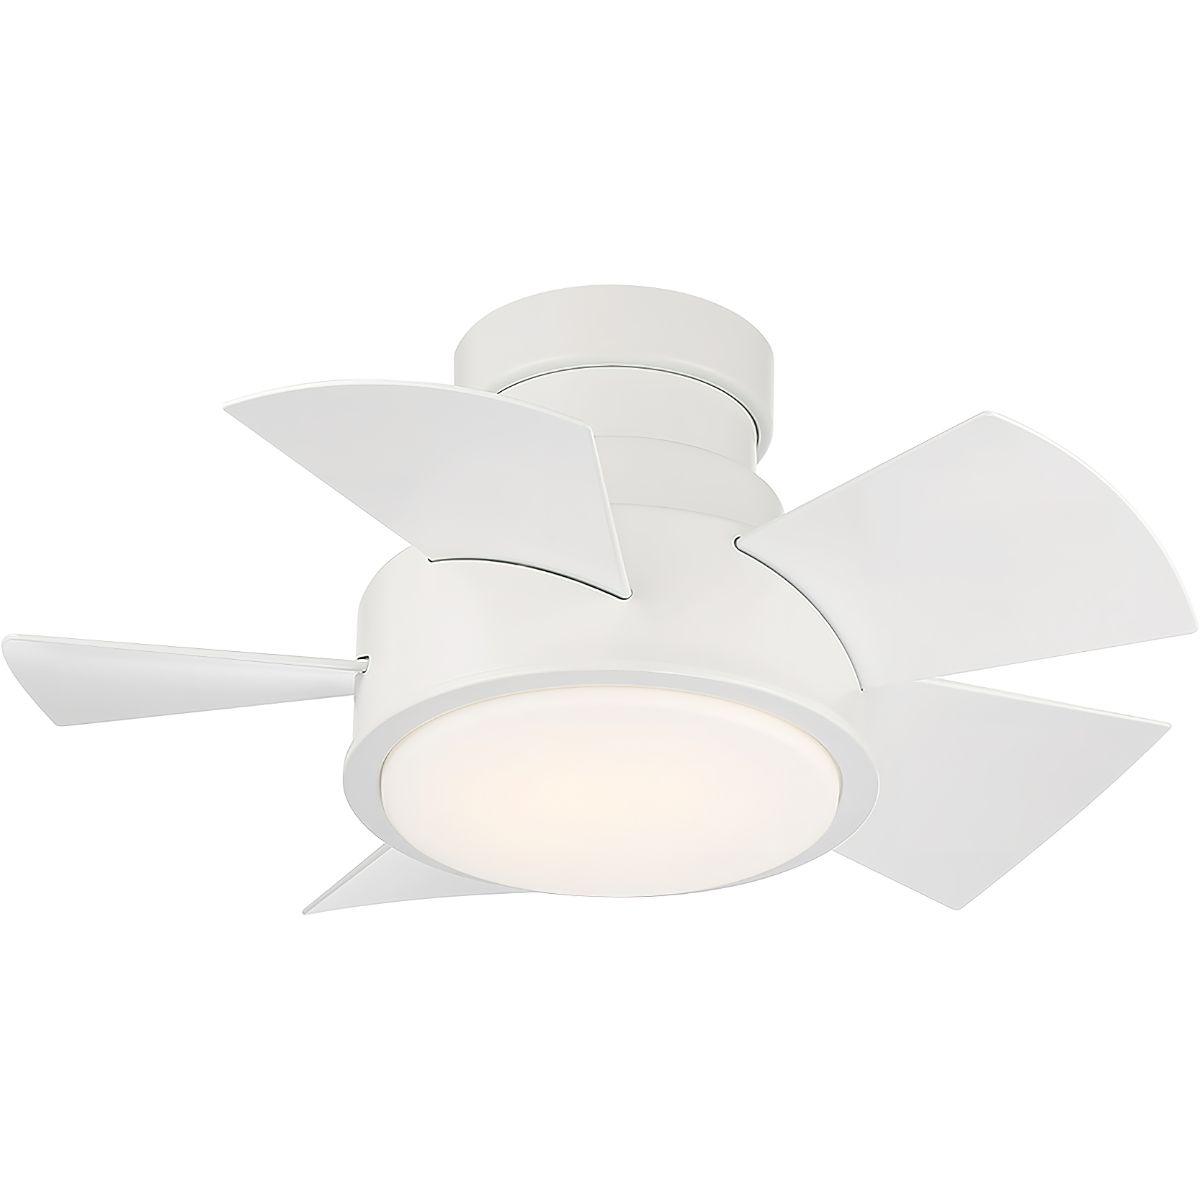 Vox 26 Inch Modern Outdoor Smart Ceiling Fan With Light And Remote, Matte White Finish